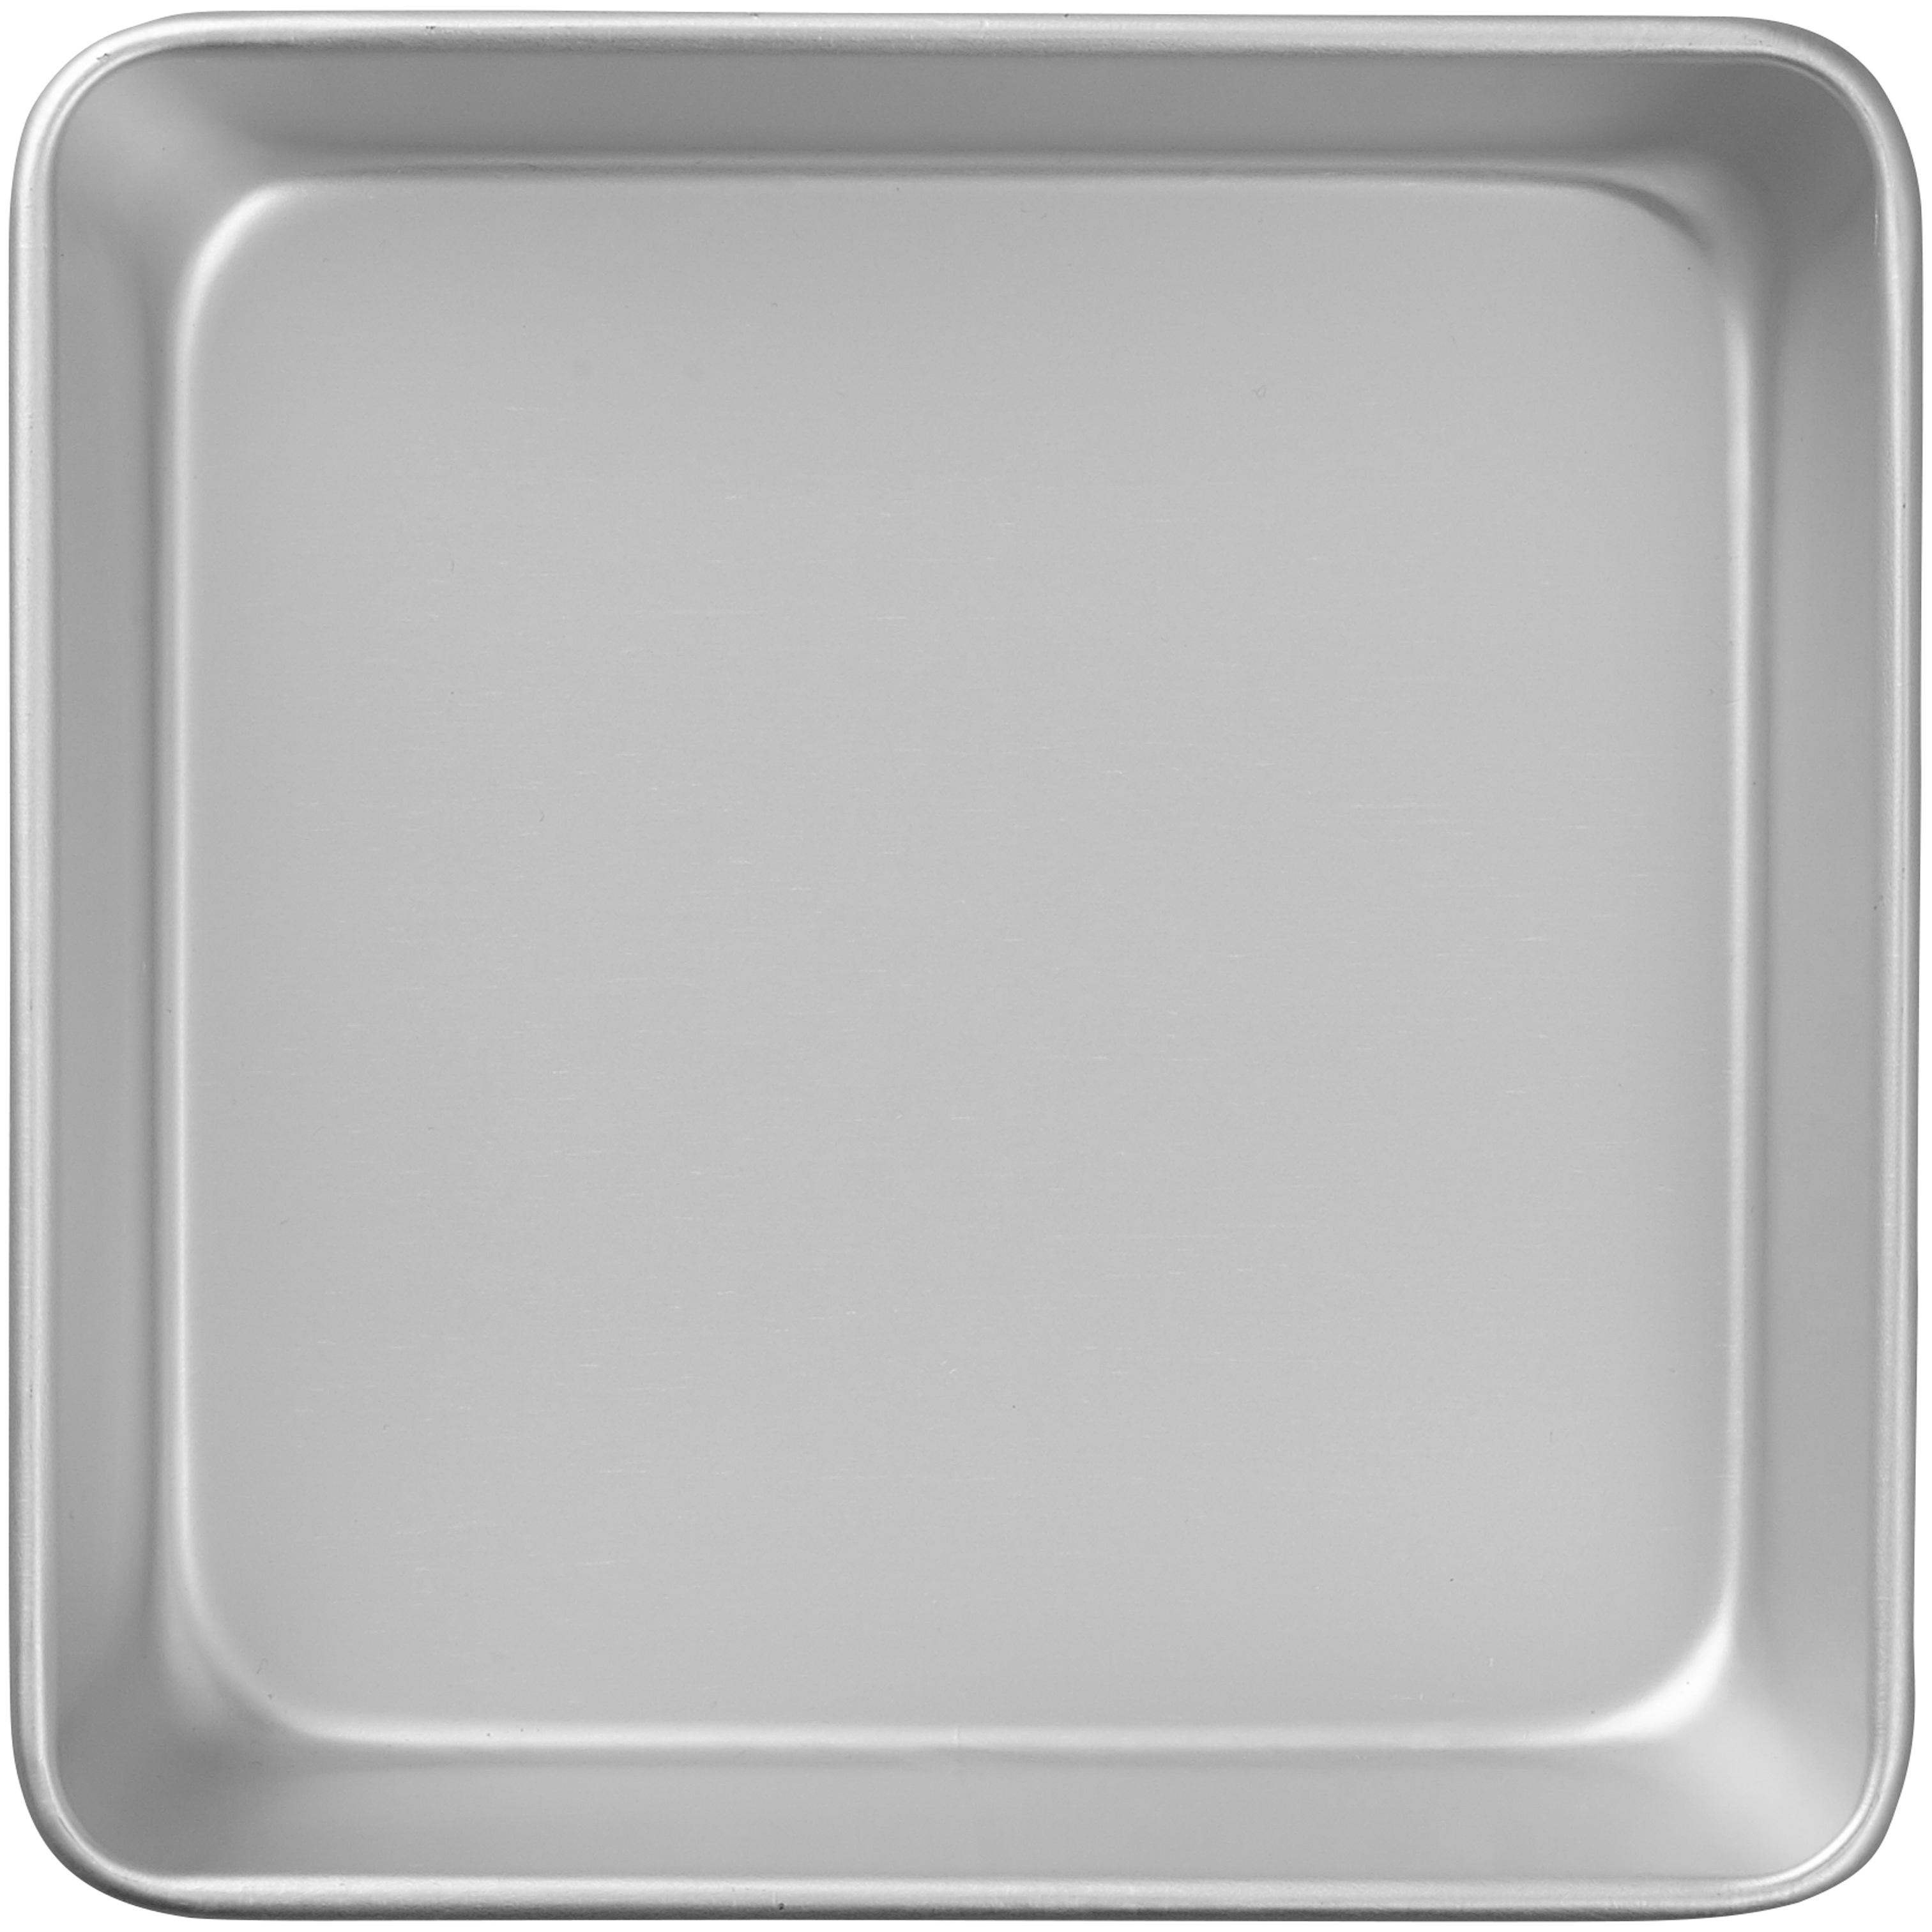 Wilton Performance Pans Aluminum Square Cake and Brownie Pan, 8-Inch - image 3 of 9